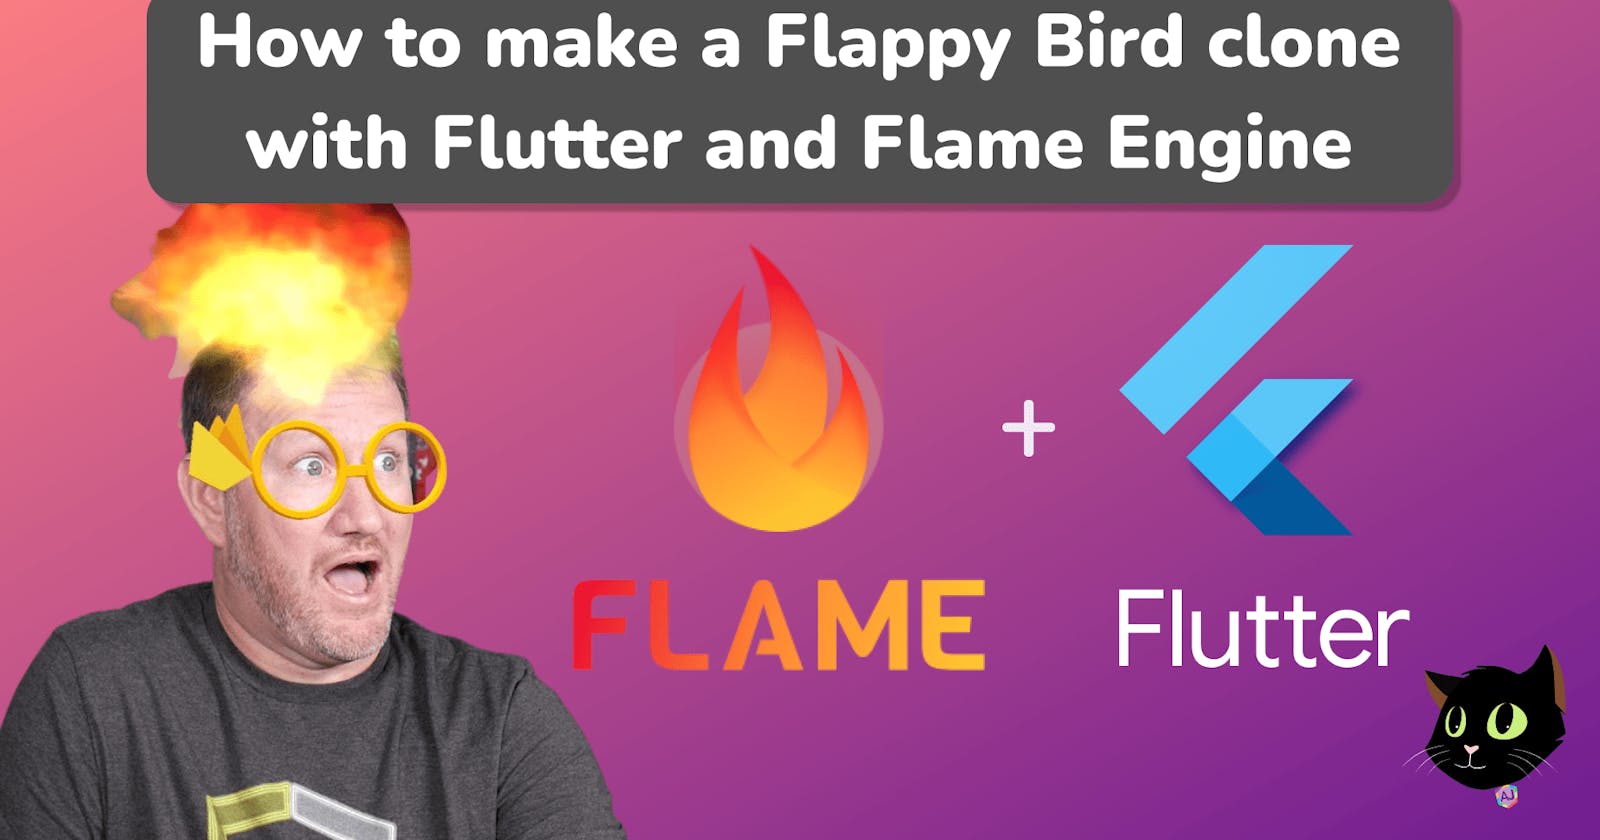 How to make a Flappy Bird clone with Flutter and Flame Engine